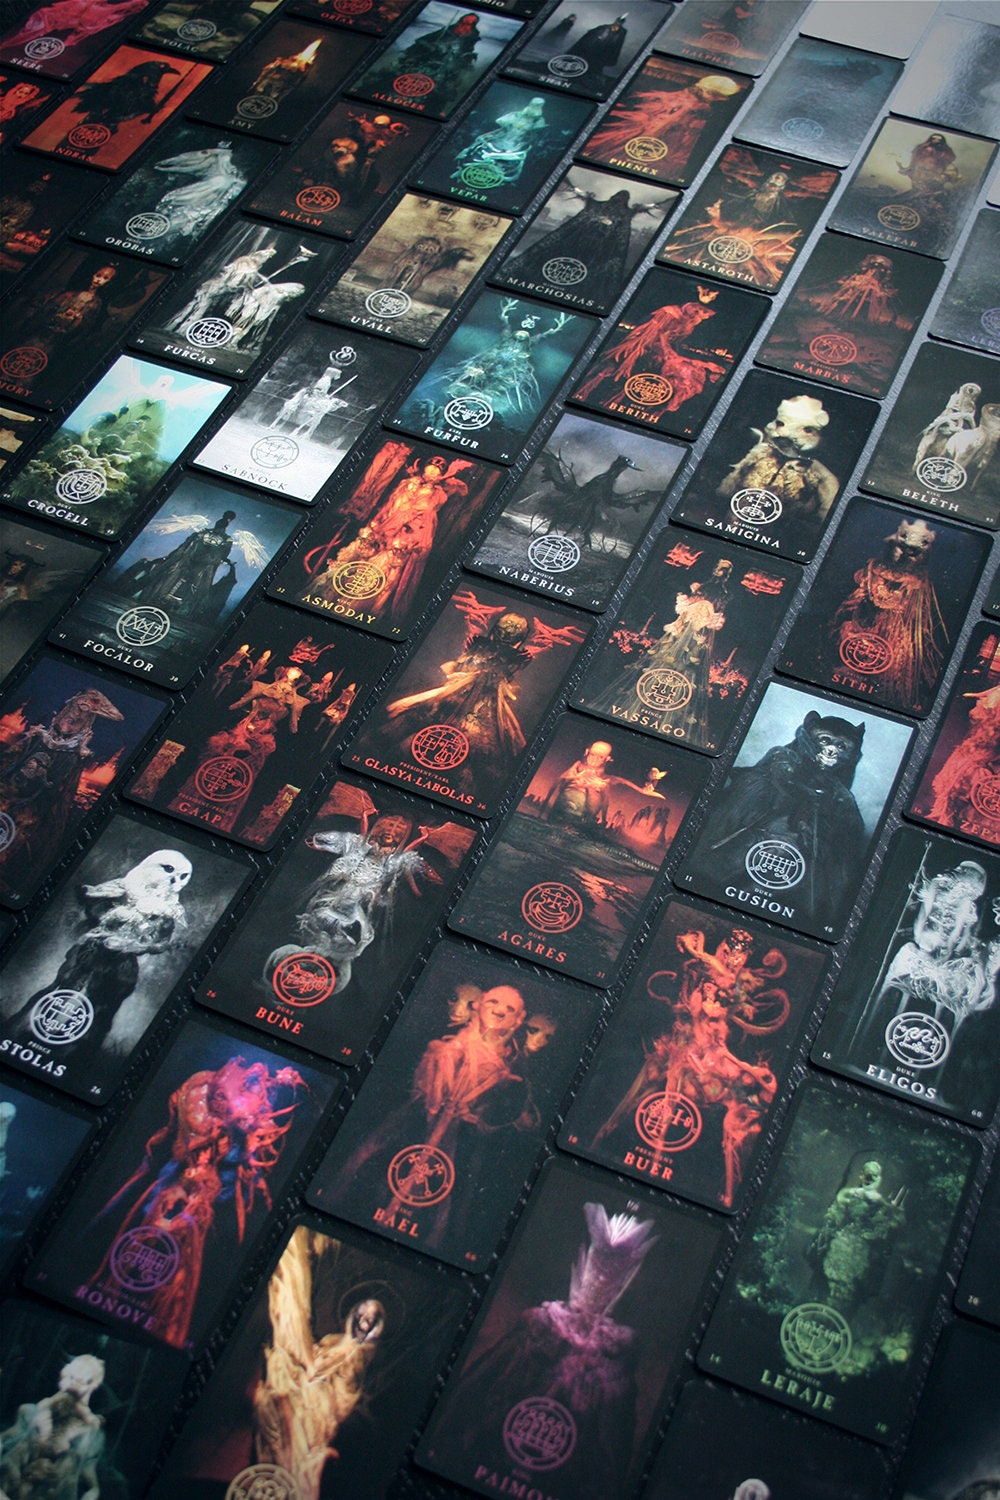 Ars Goetia Demons Cards by TORVENIUS - CARD DECK (limited edition)